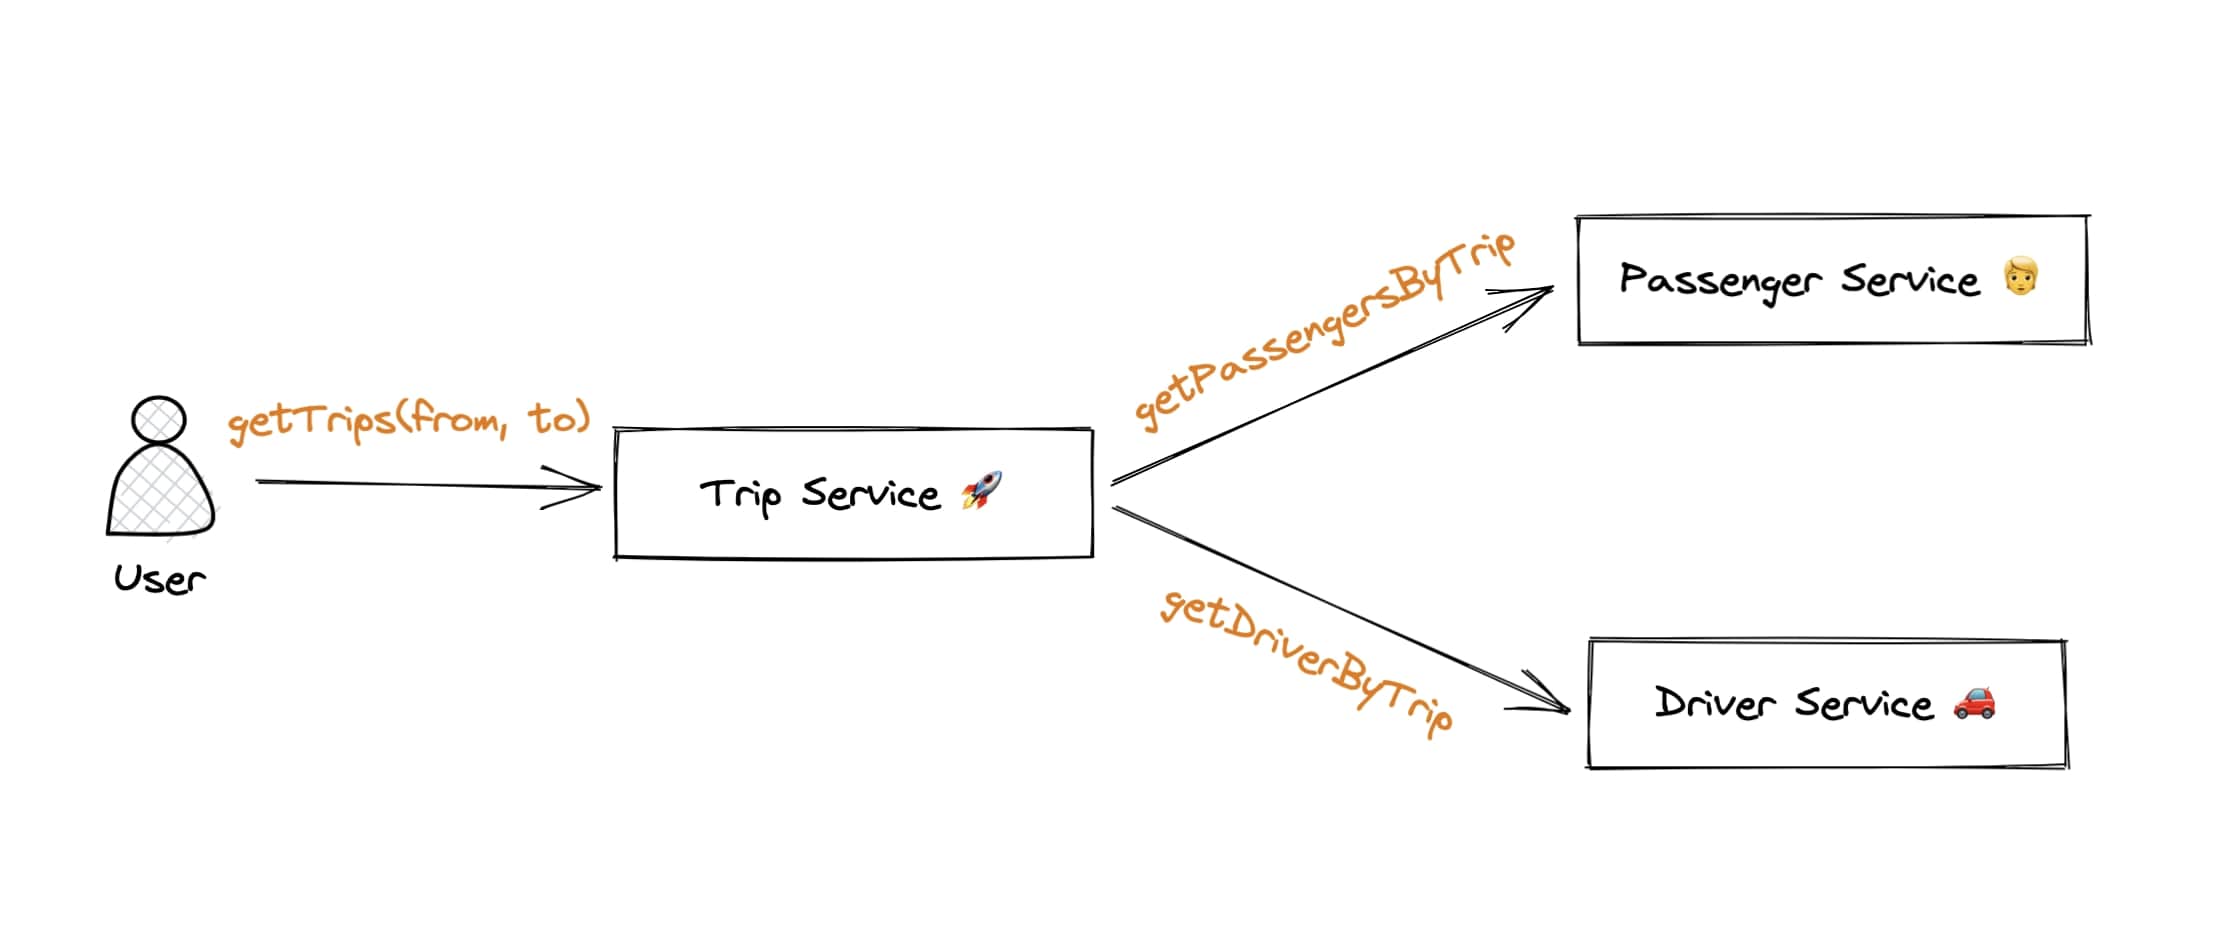 A simple MS architecture with three services